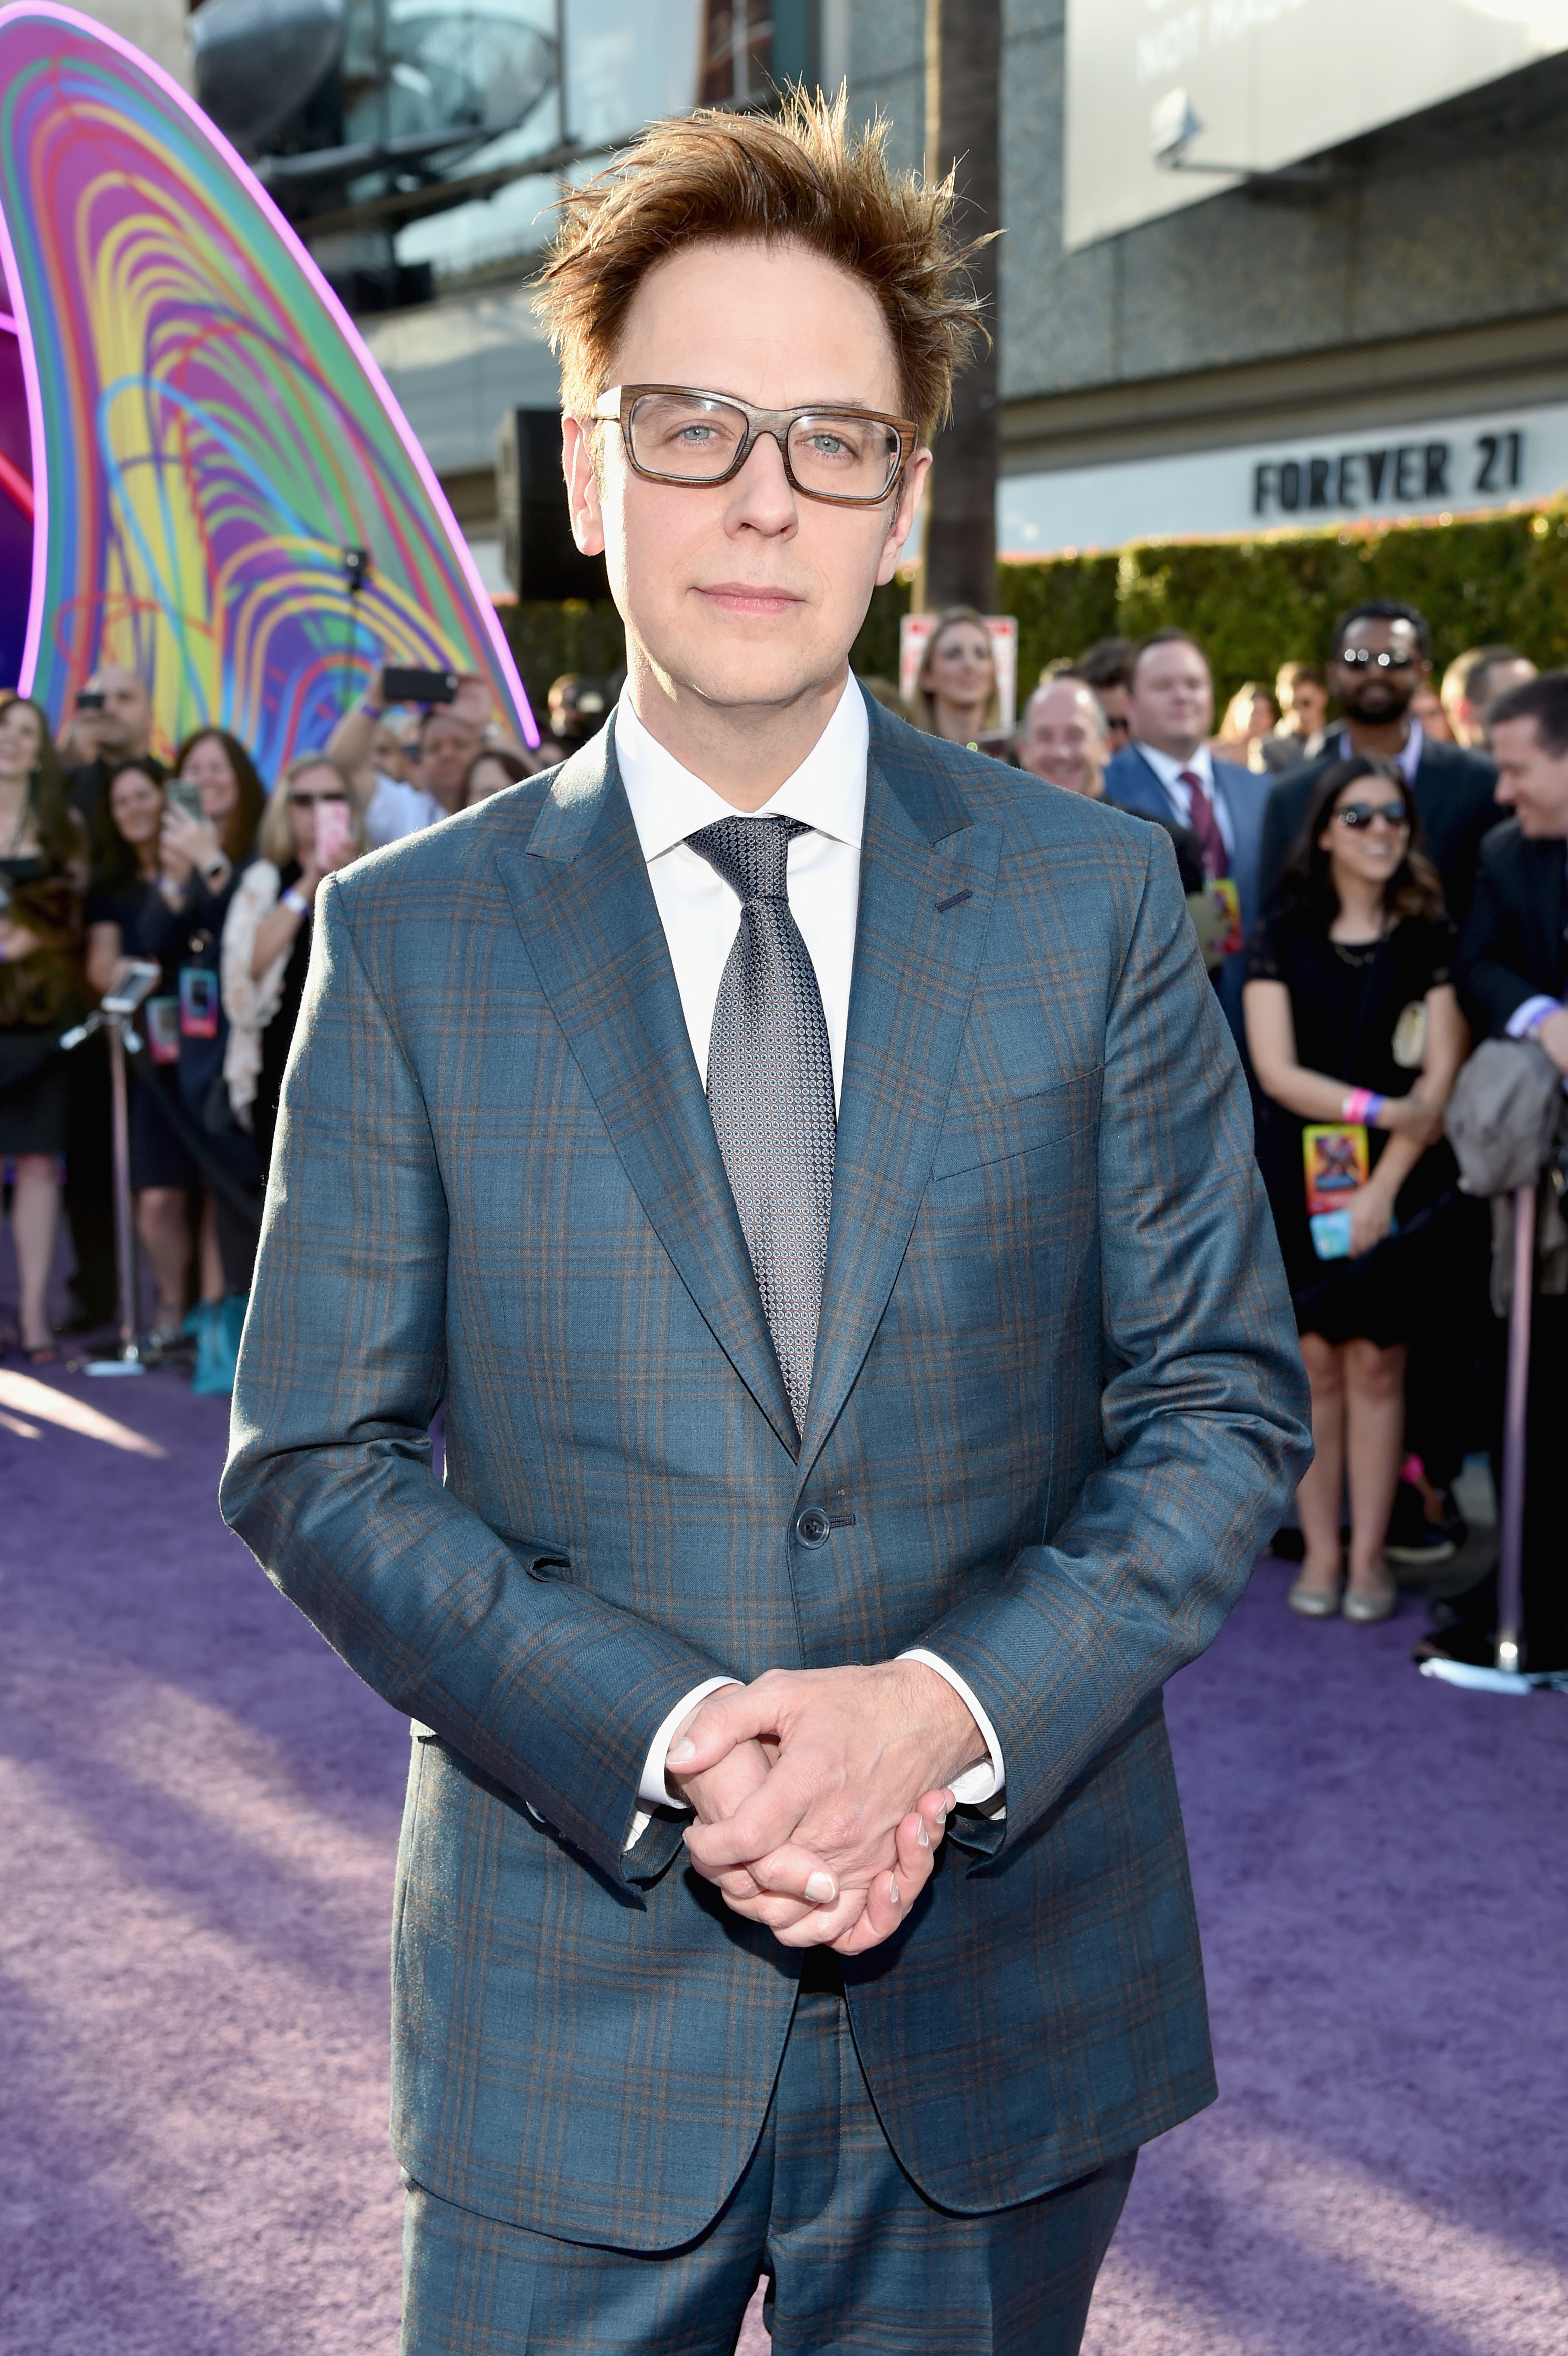 James Gunn at the premiere of Guardians of the Galaxy Vol. 2